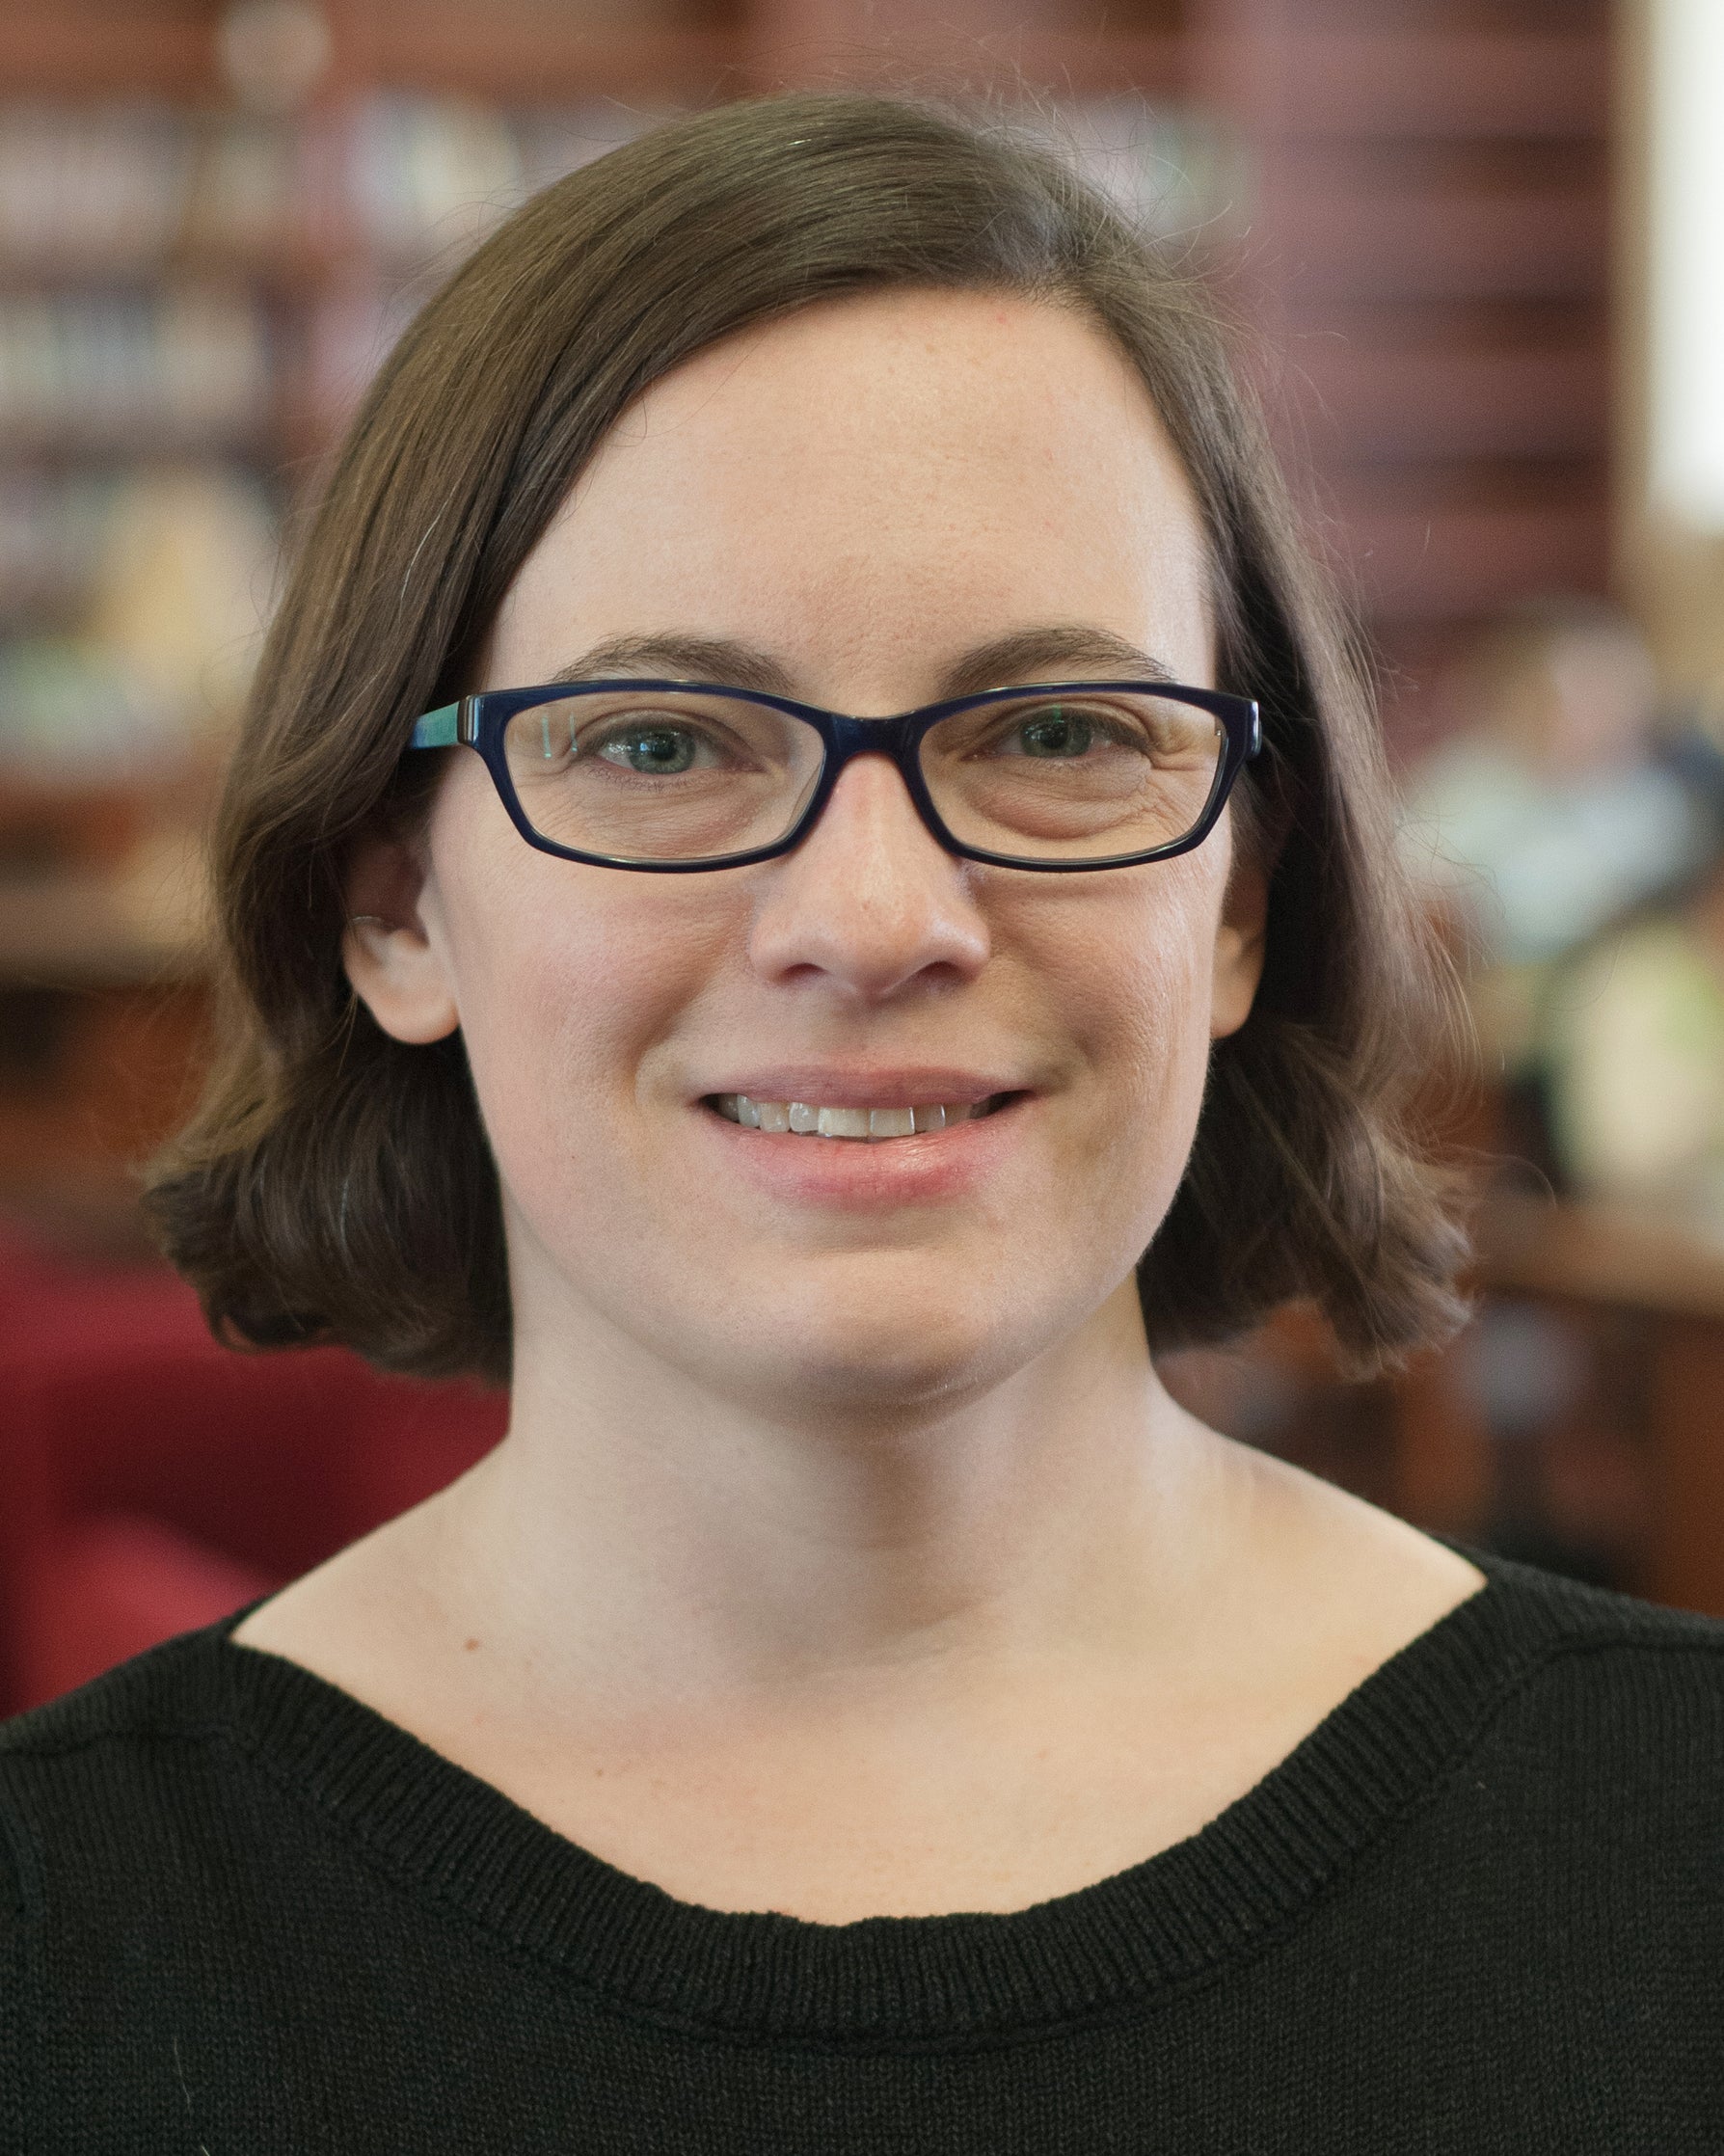 Photo of Liz Petrick, a female with chin length hair and rectangular glasses, in front of a bookcase